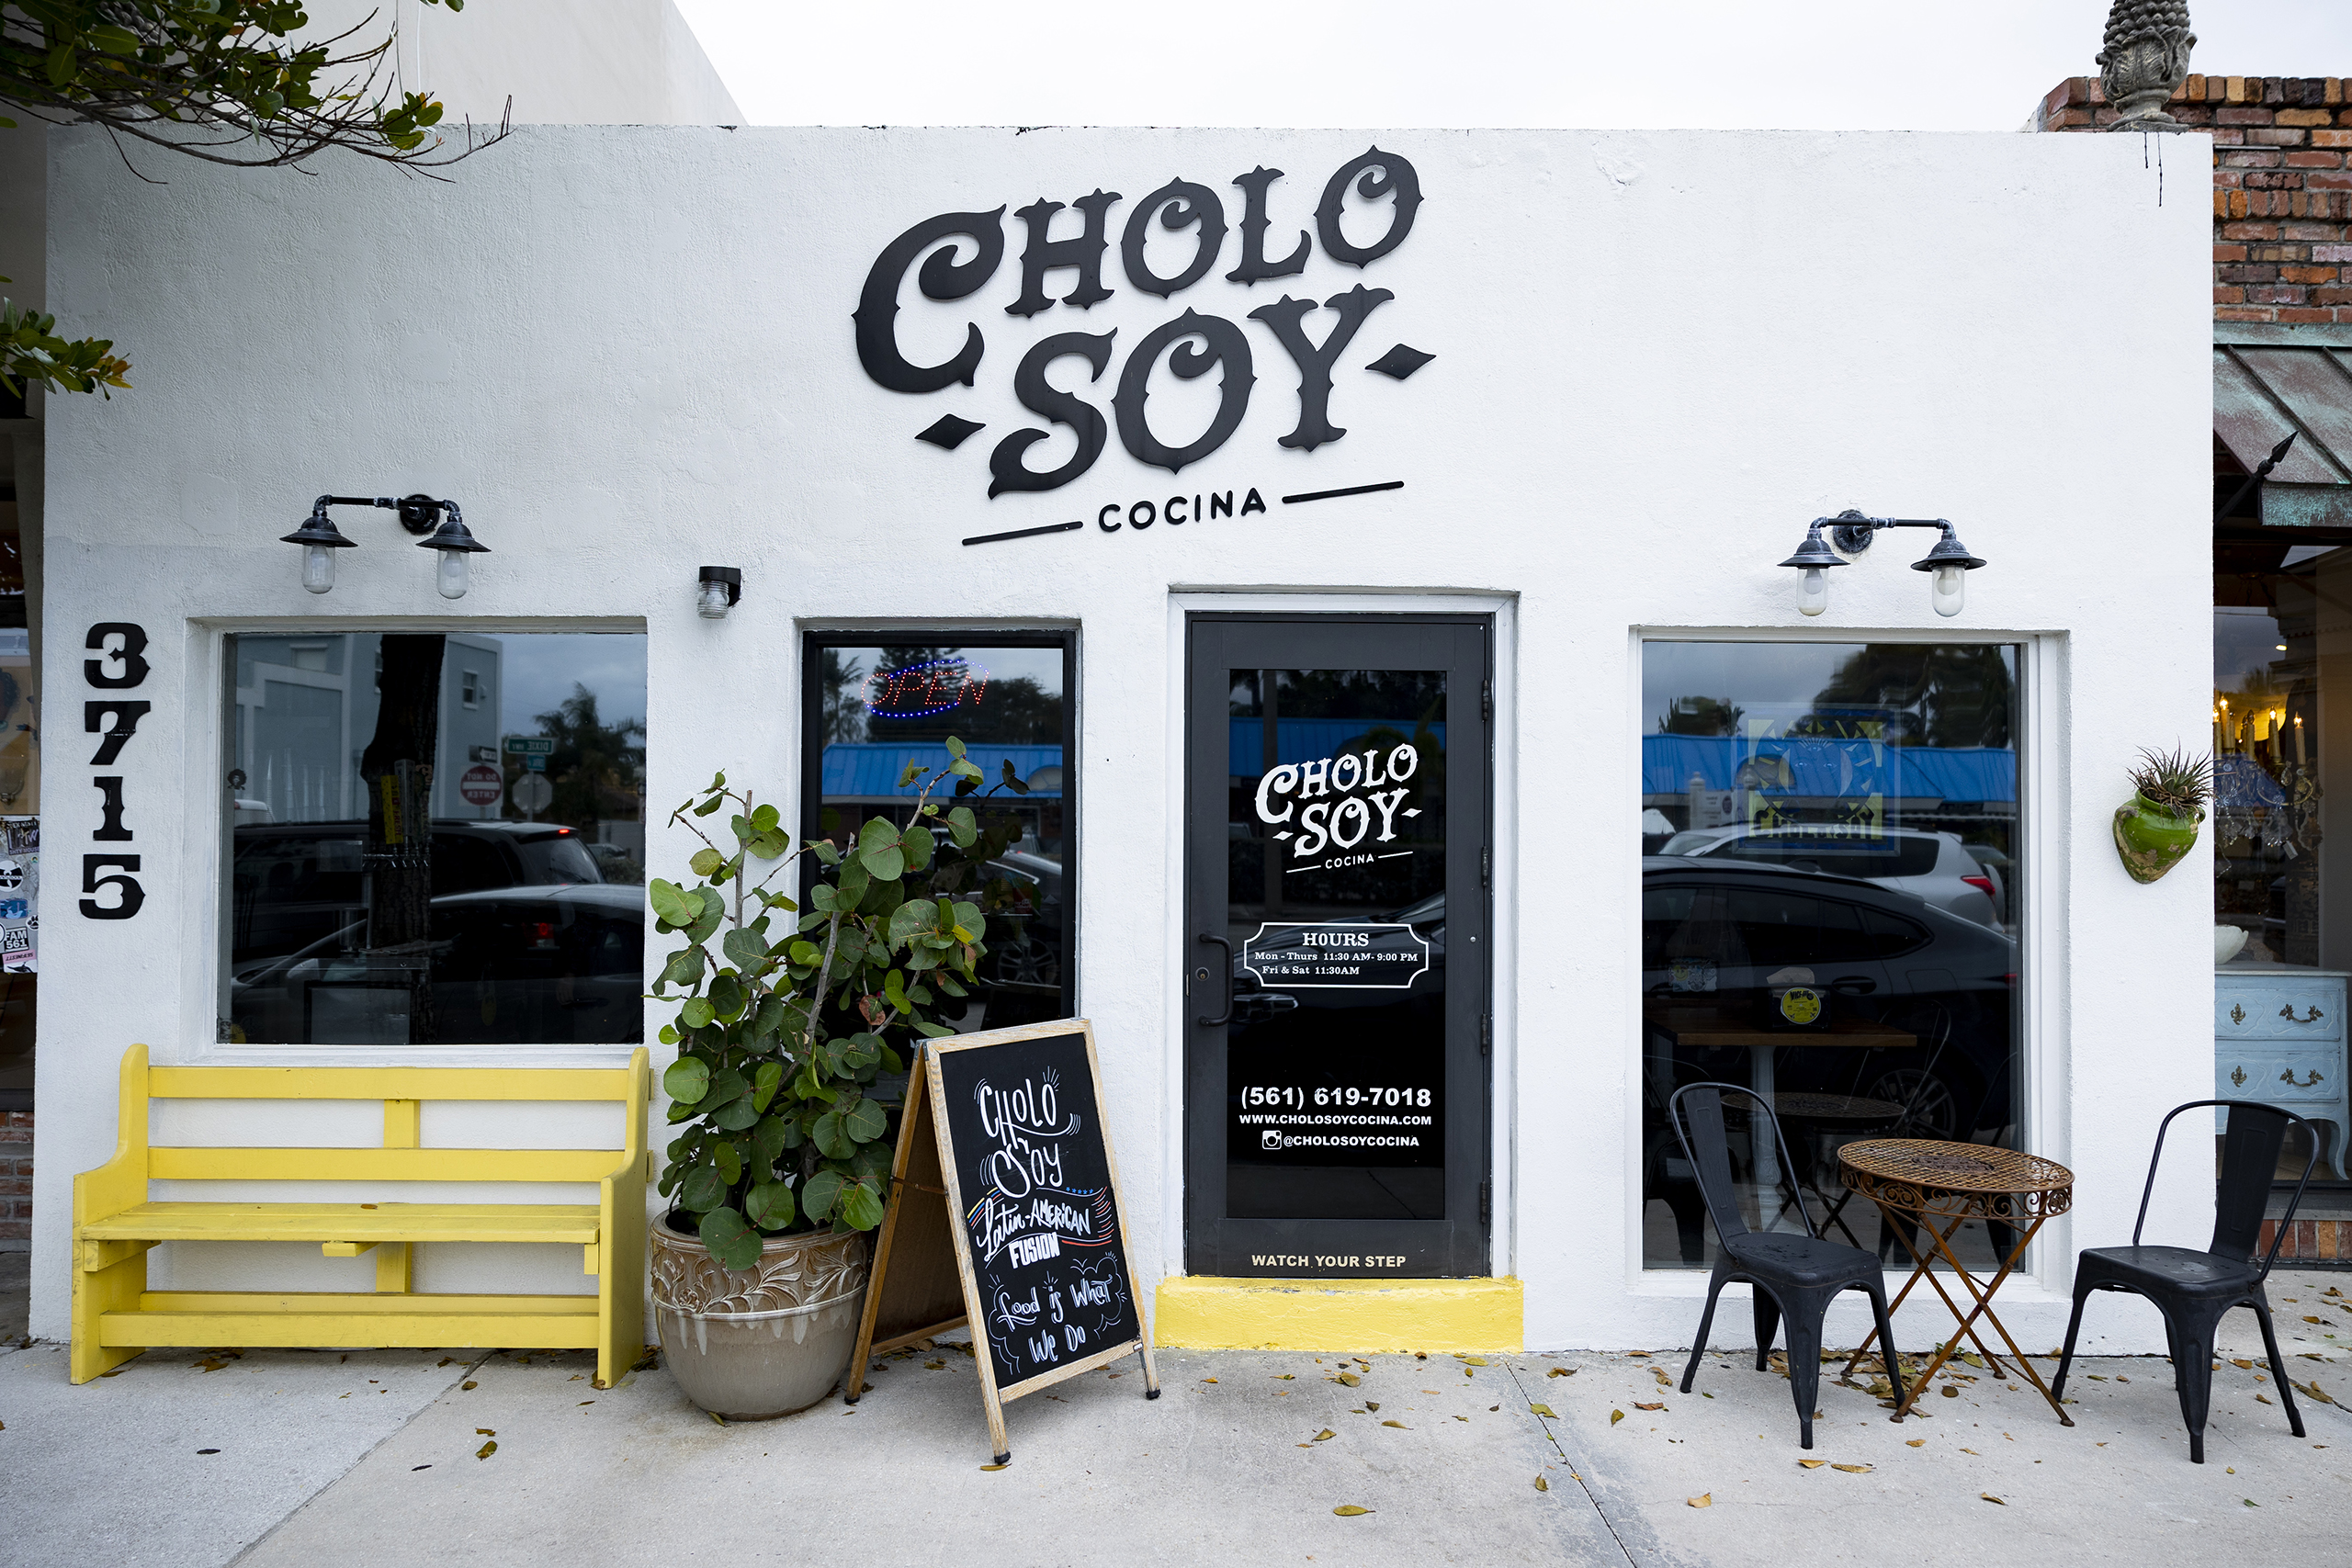 Cholo Soy Cocina in West Palm Beach, FL.